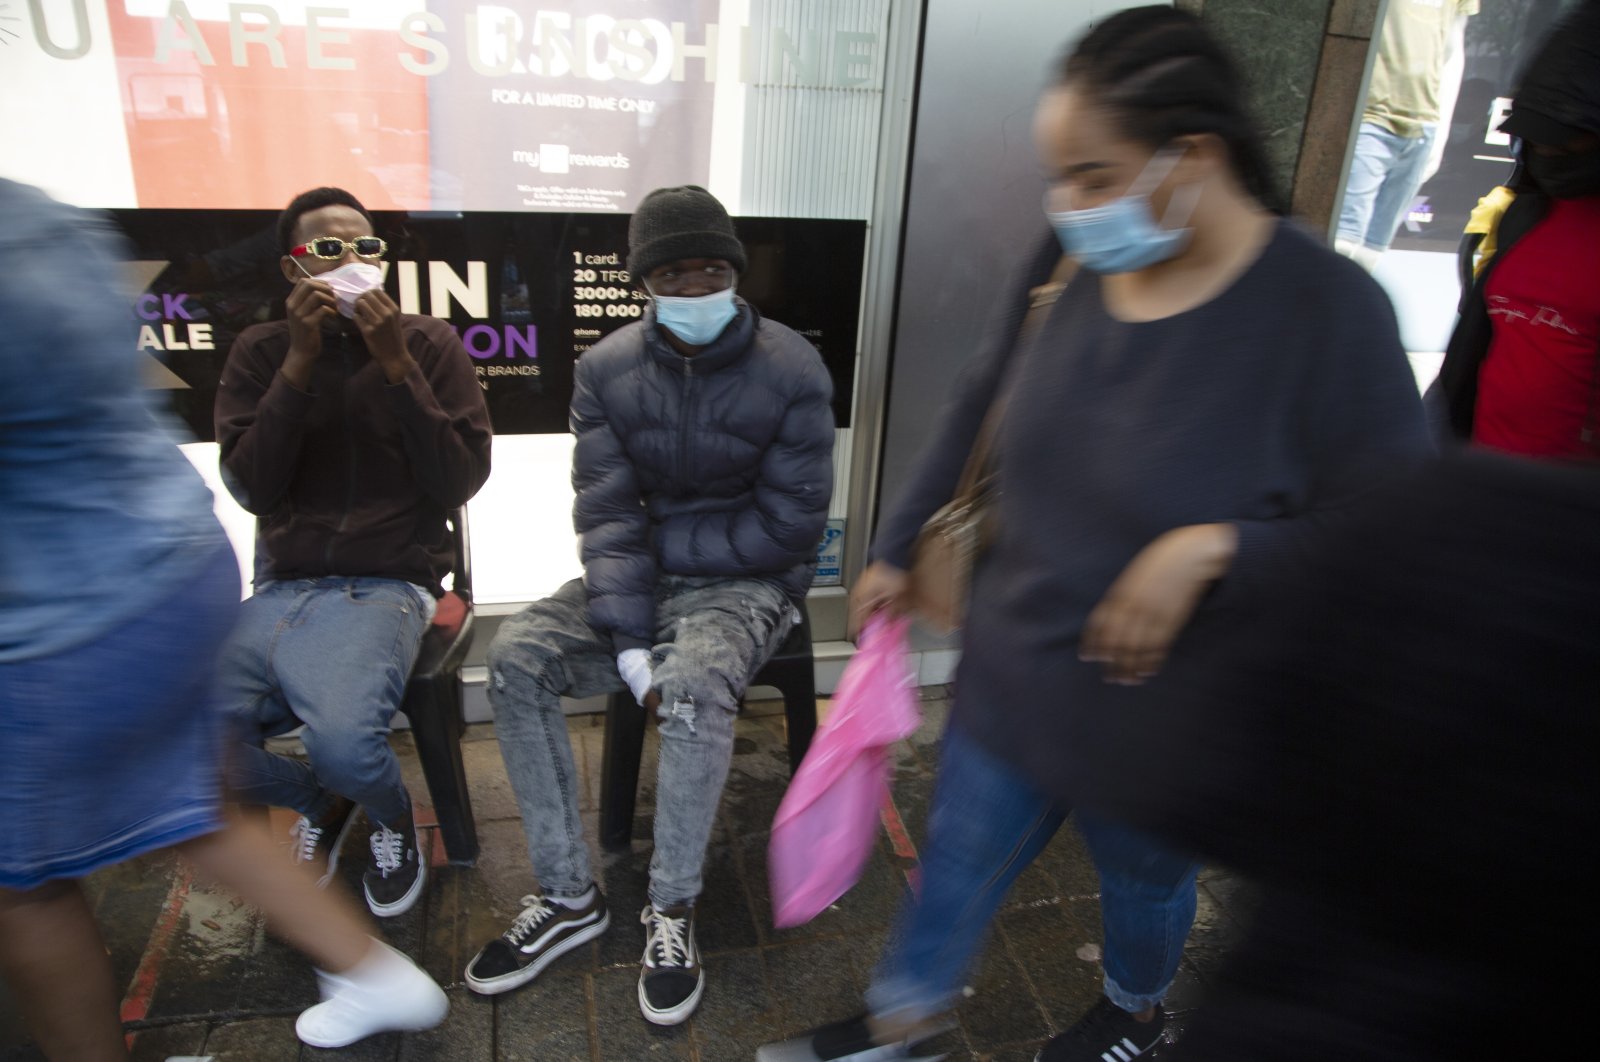 Shoppers wearing face masks on a crowded sidewalk in Pretoria, South Africa, Nov. 27, 2021. (AP Photo)